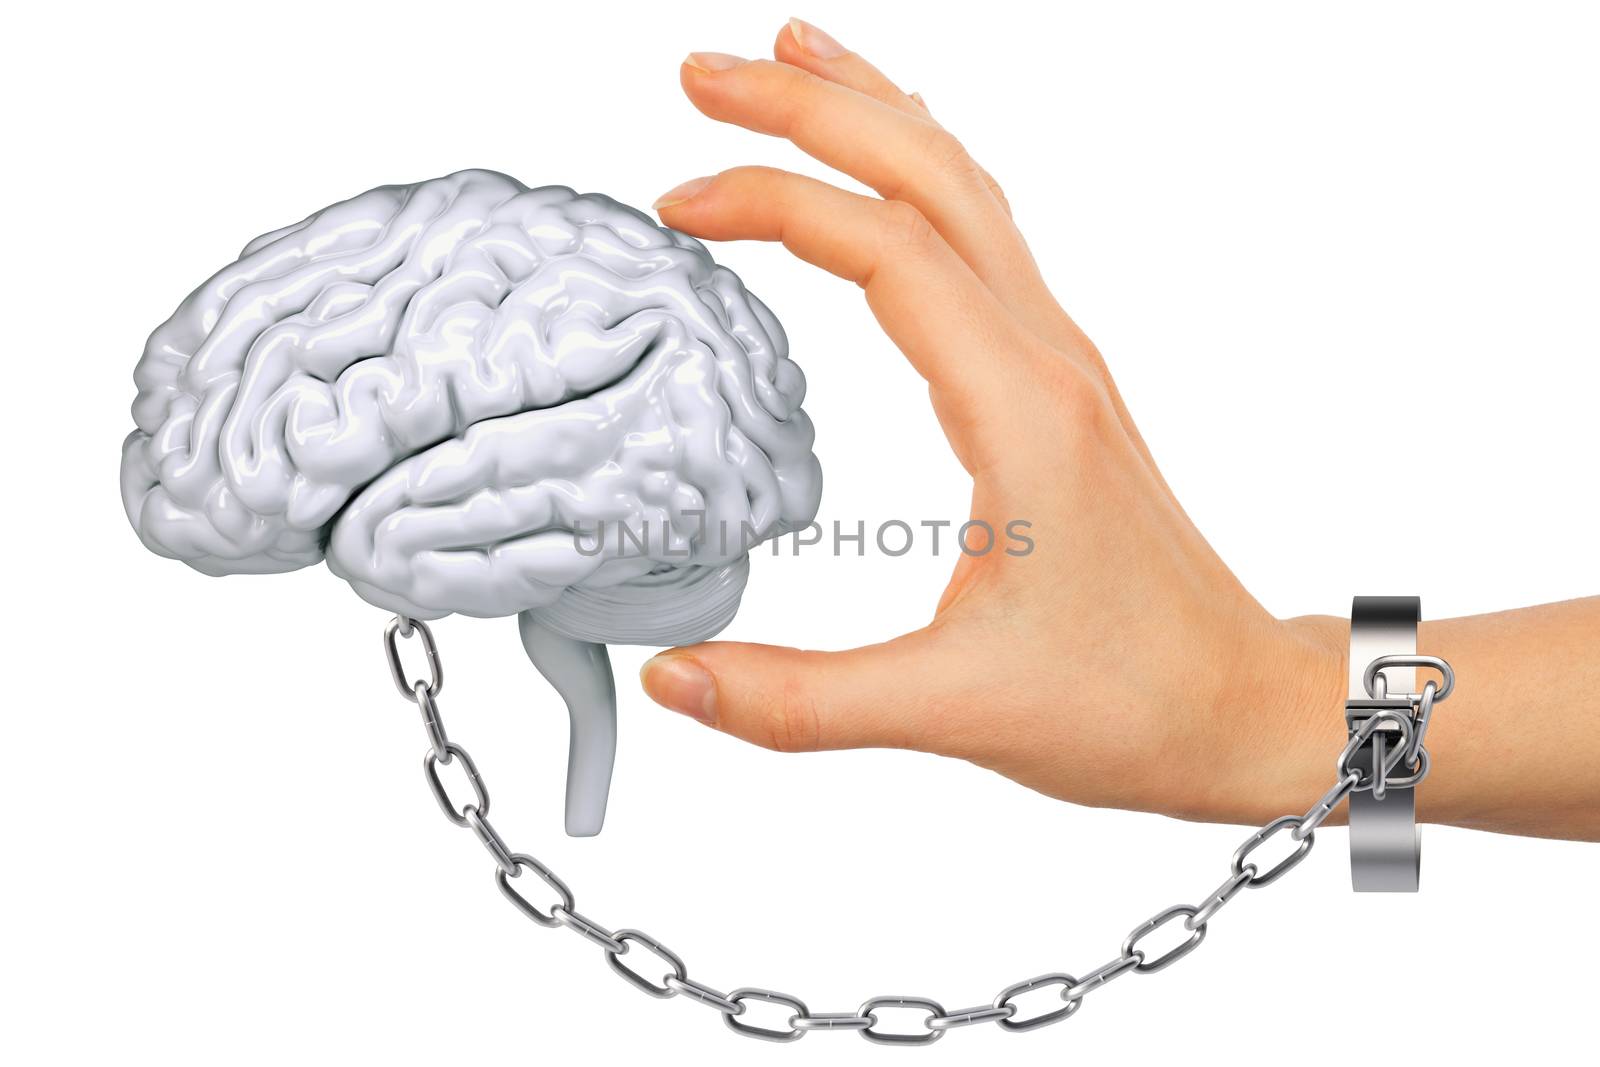 Chained hand holding human brain by cherezoff